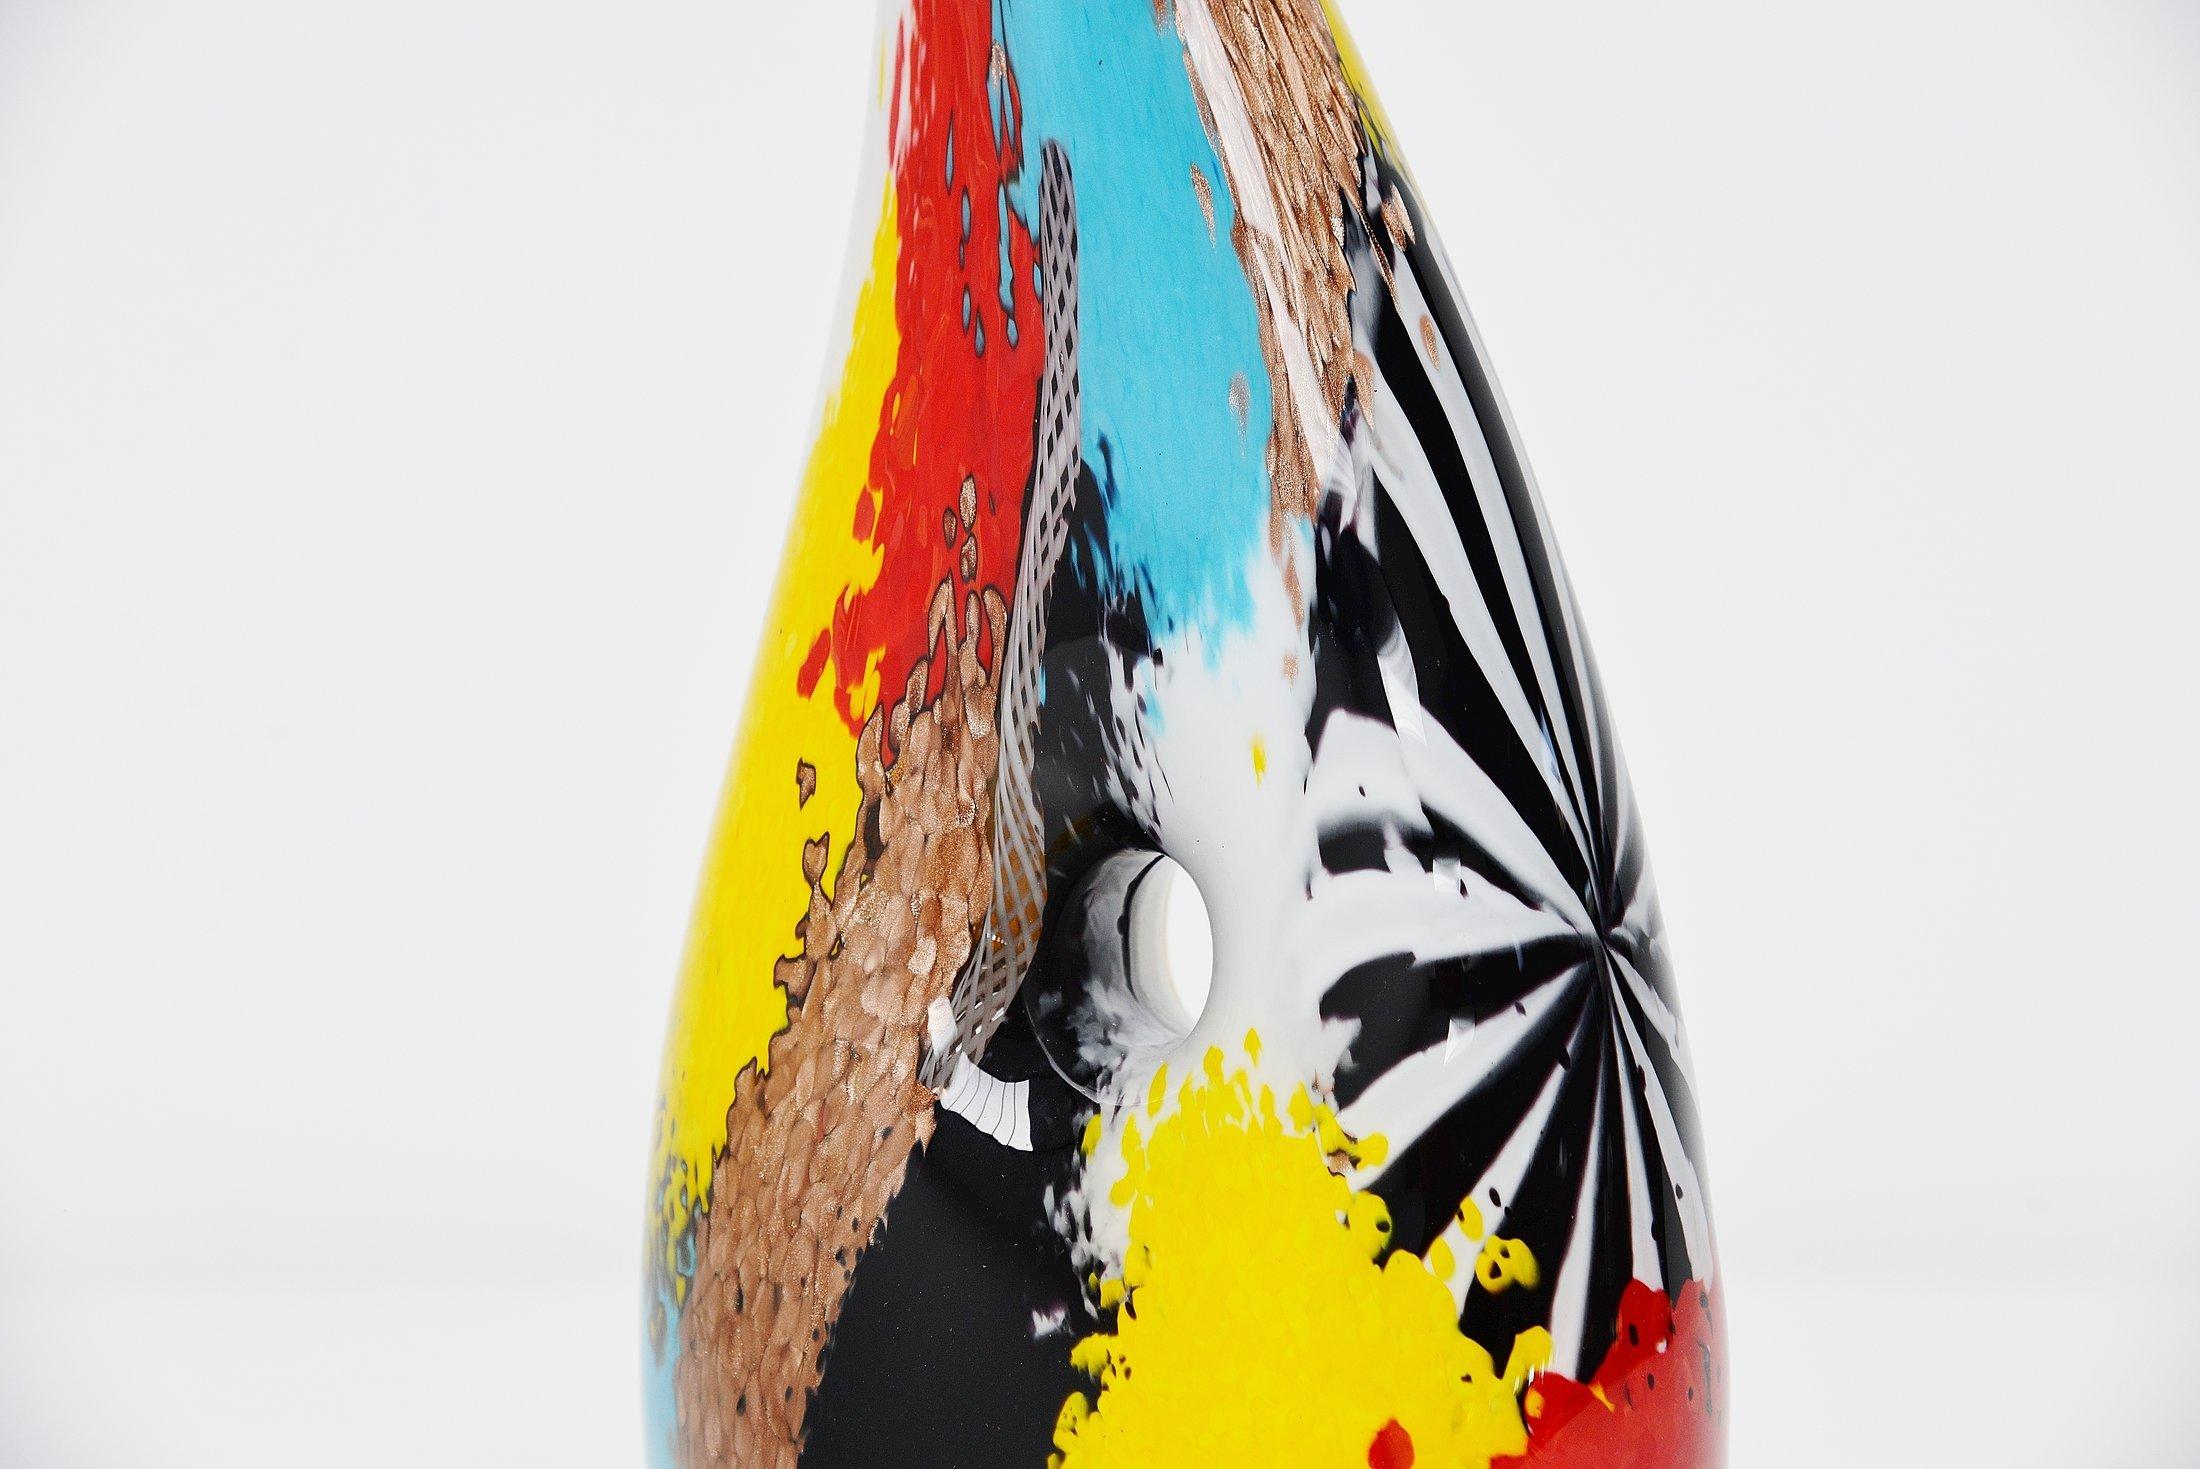 Spectacular vase designed by Dino Martens and manufacturer by Aureliano Toso, Murano, Italy, 1954. This vase is from the Oriente series and for me this is one of the nicest models. The vase is made of typical Murano glass and has very nice colors,